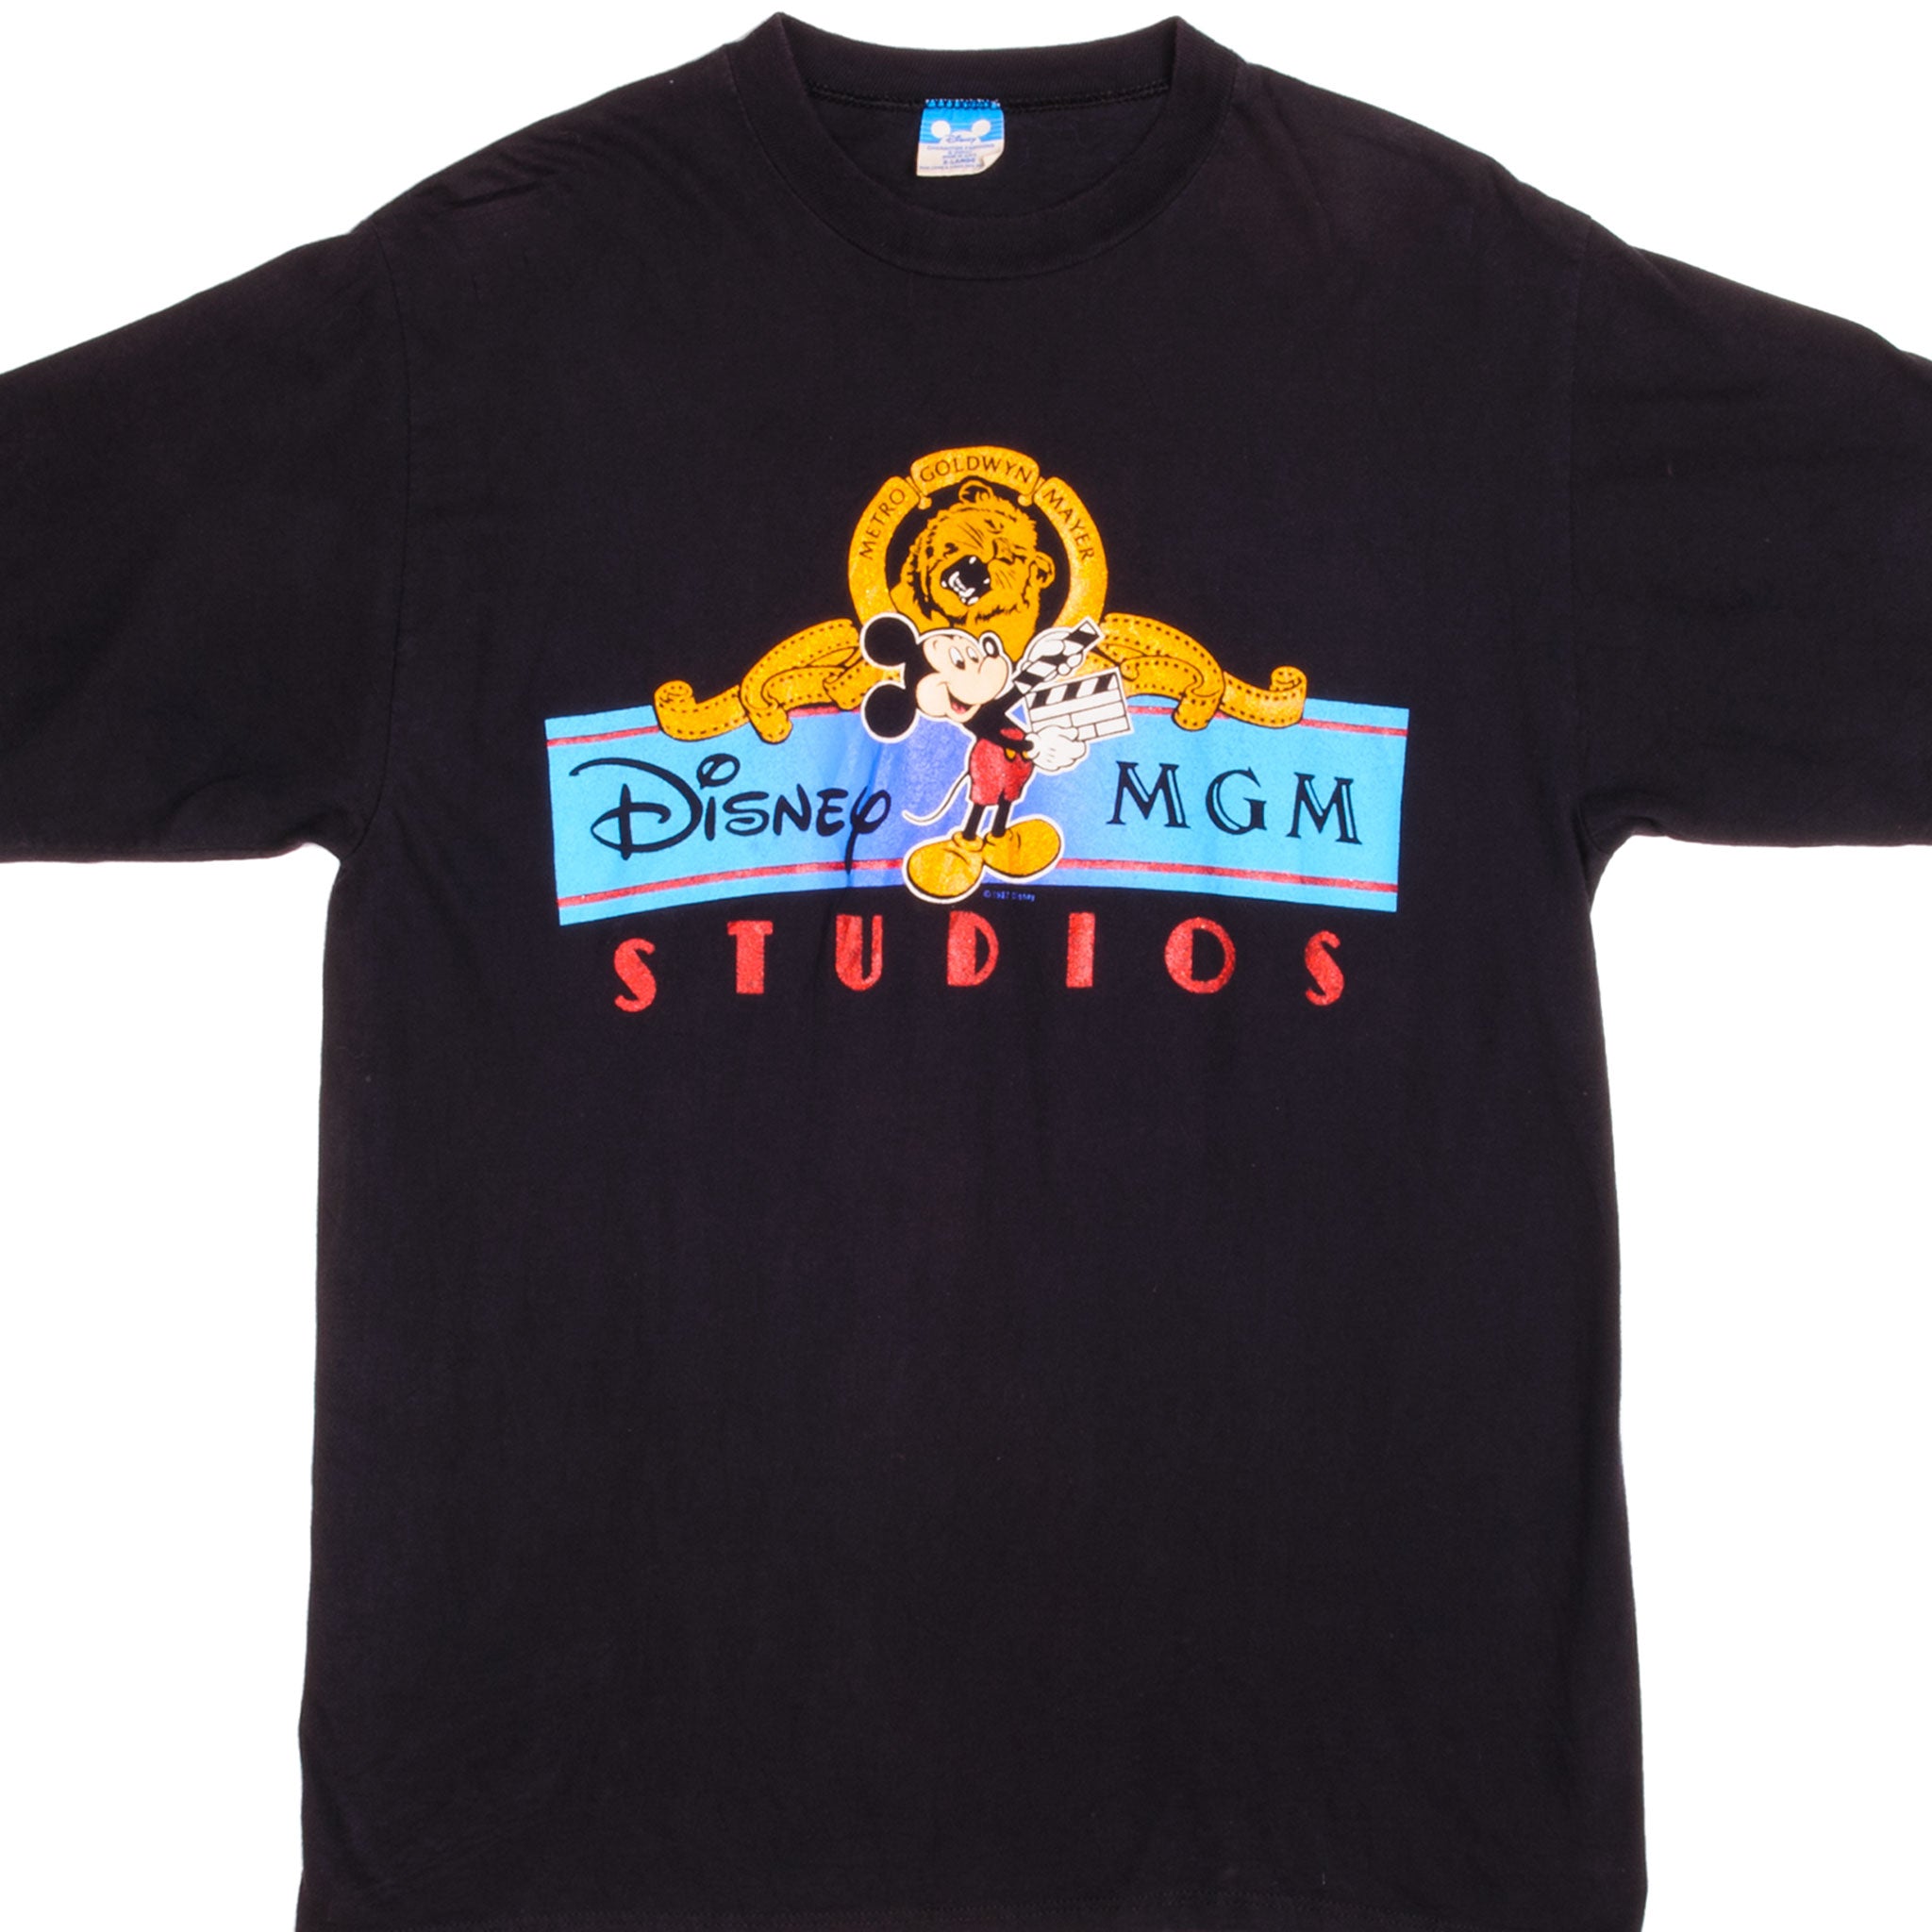 VINTAGE DISNEY MGM STUDIOS TEE SHIRT 1987 SIZE LARGE MADE IN USA ...